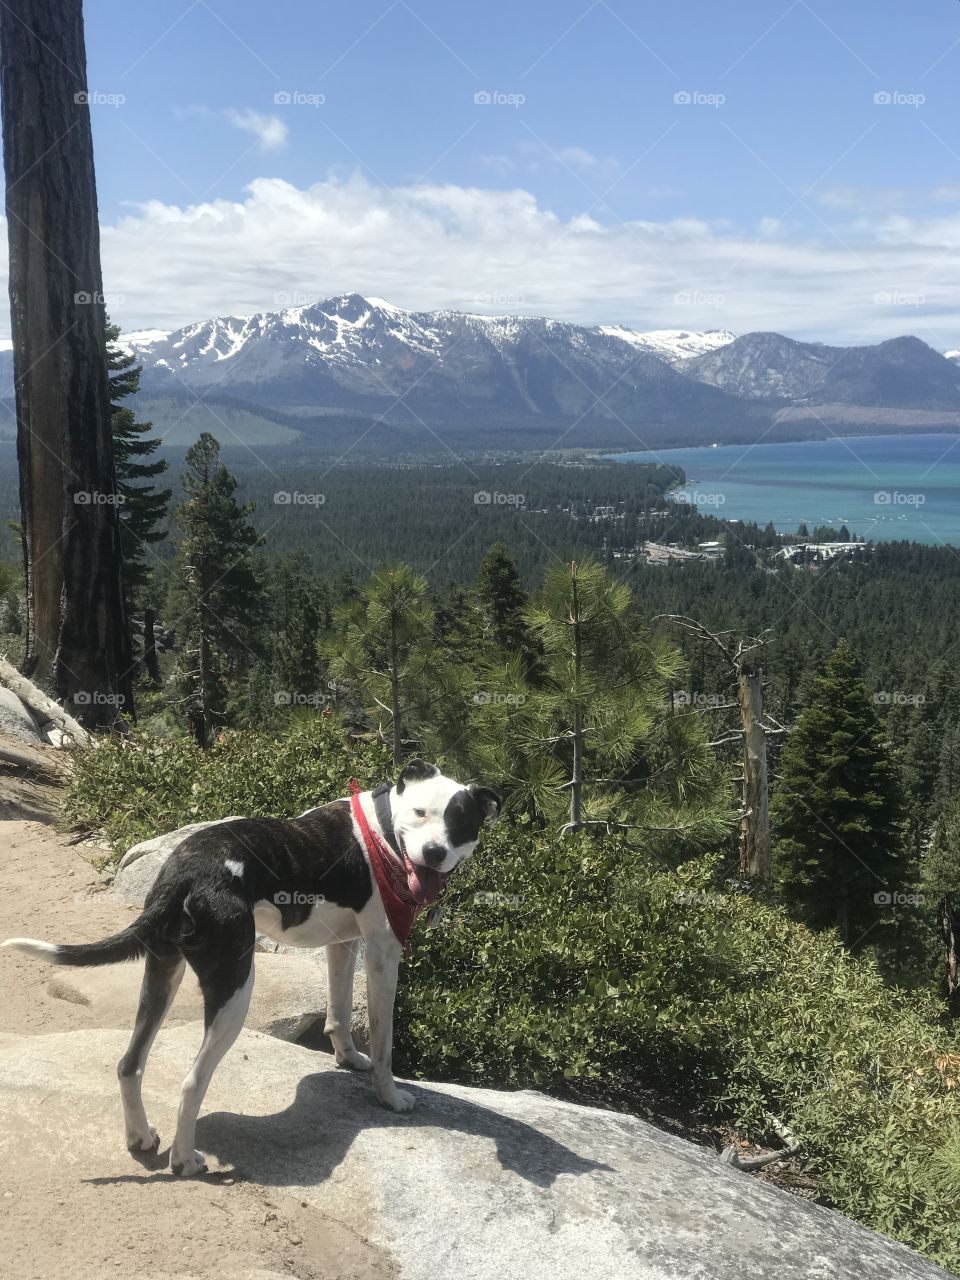 A dog a day keeps the doctor away. Strolling along a hiking trail with a pup by your side. Mountains and the bluest of lakes in the background. 